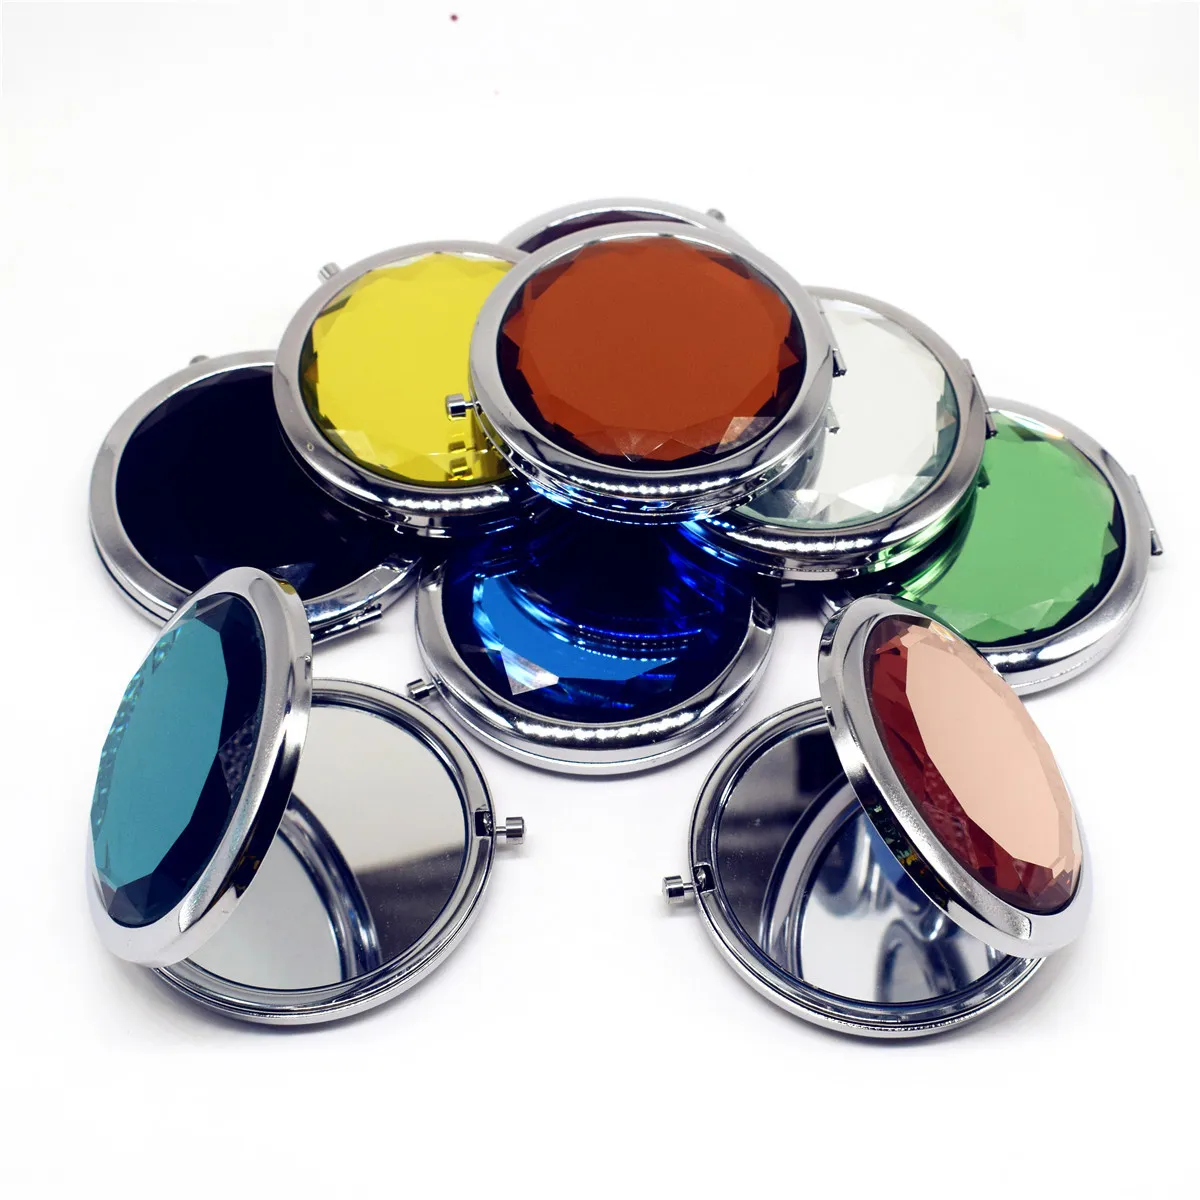 Crystal Makeup Mirror Portable Round Folded Compact Mirrors Gold Silver Pocket Mirror Making Up For Personalized Gift8825016